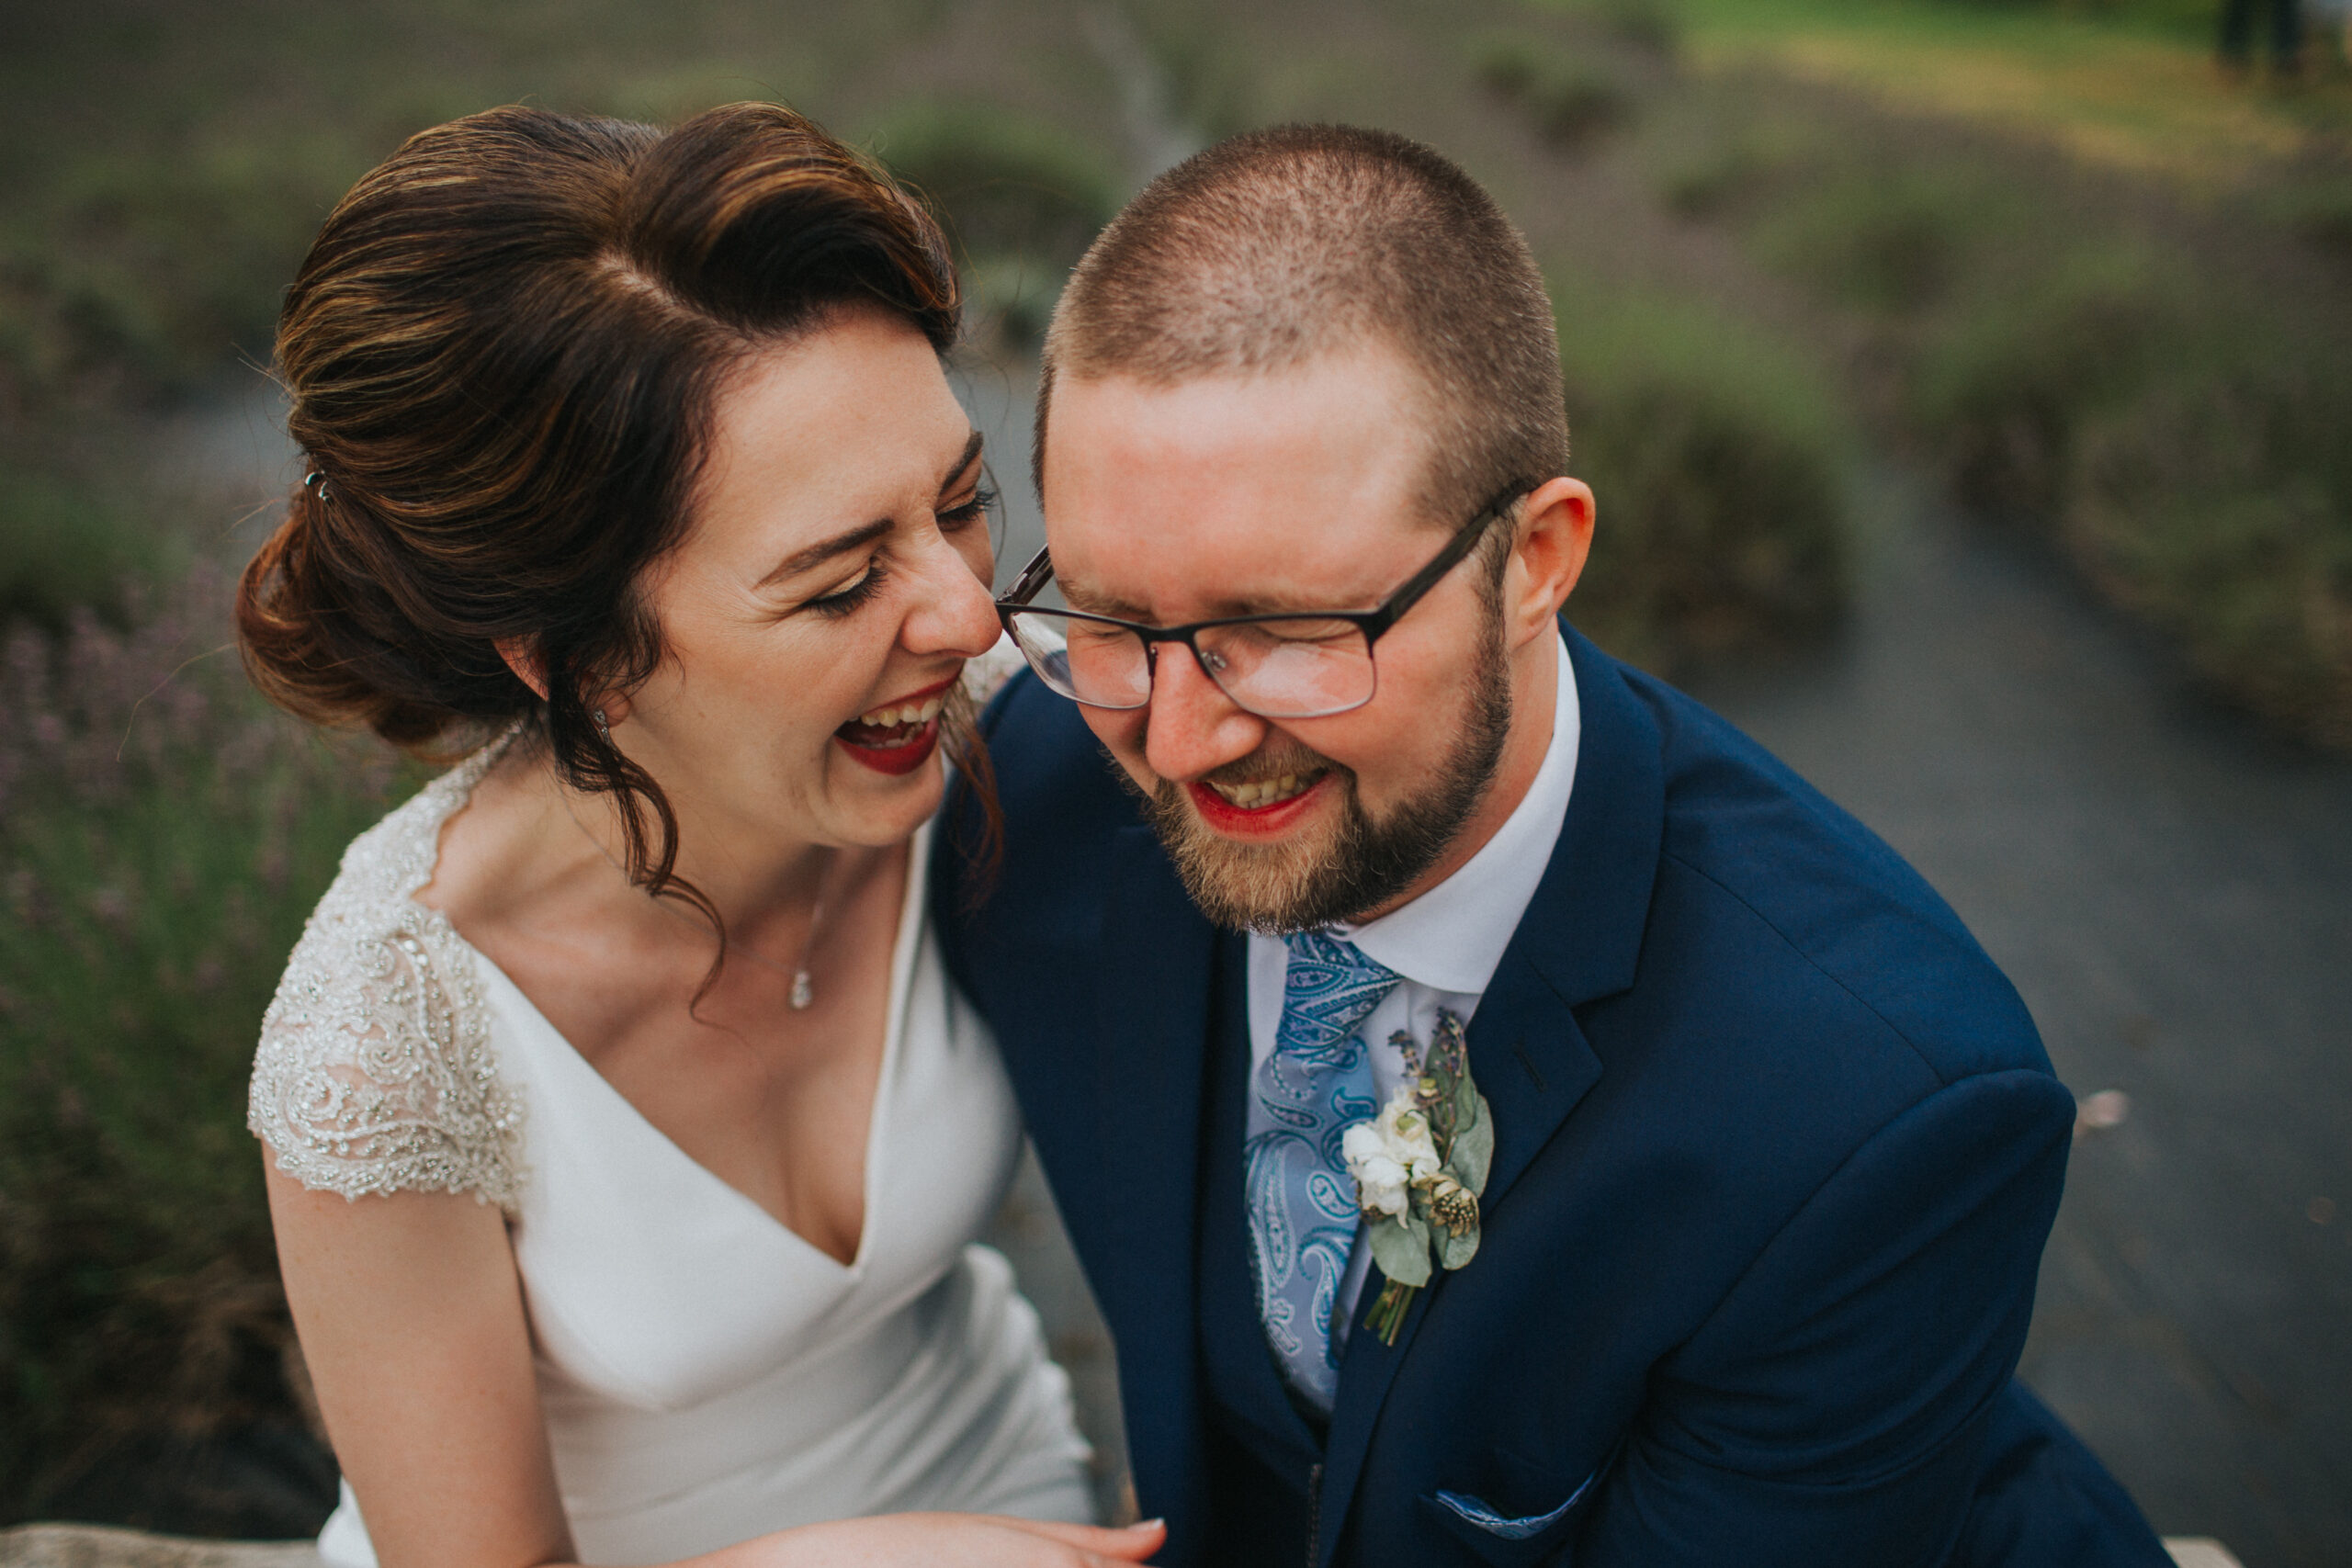 Bride and groom's happiness radiates in the summer glow